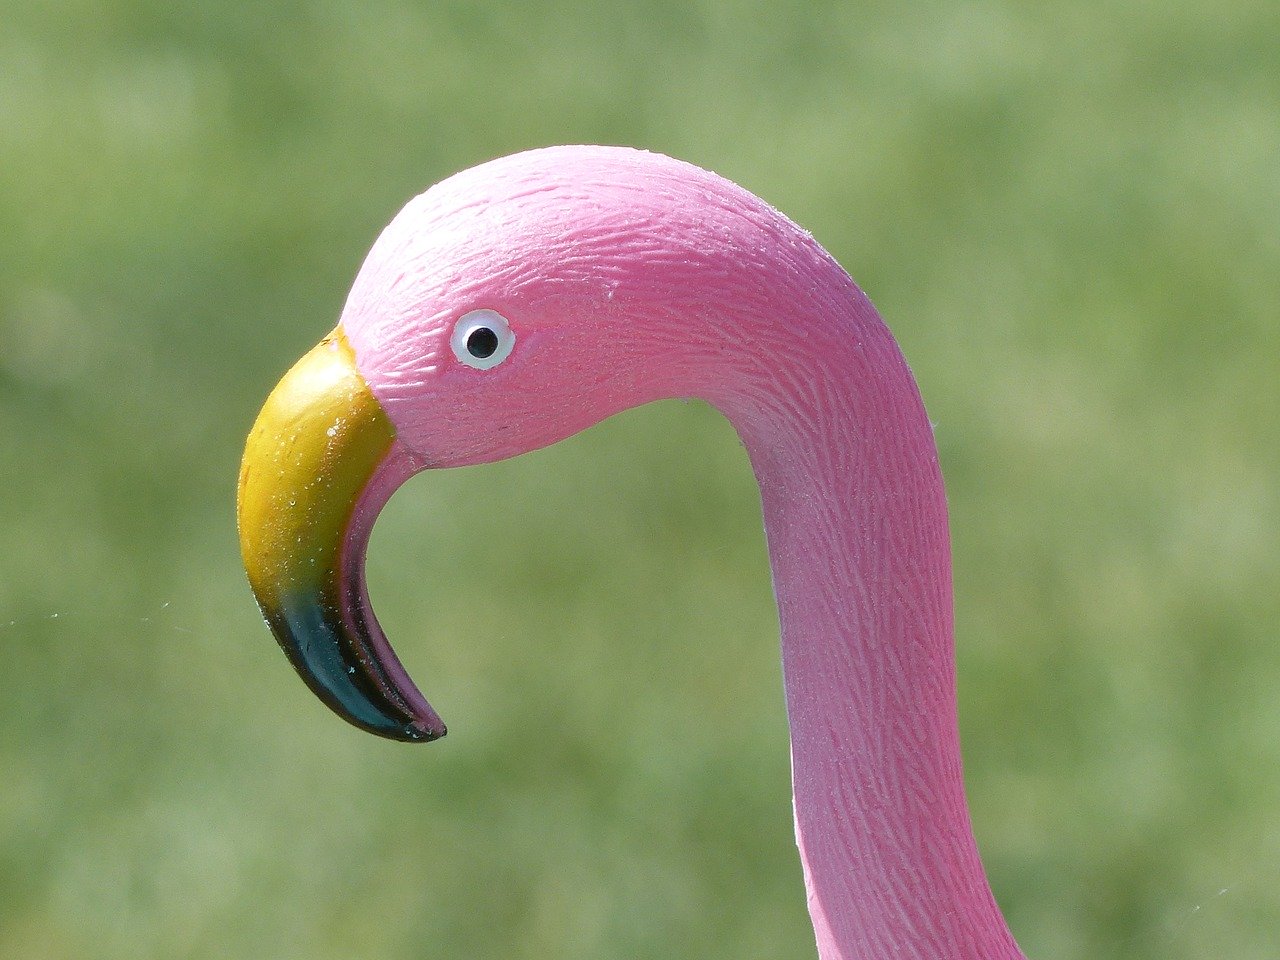 Pink flamingo lawn ornaments were invented in 1957. The first one had a name: Diego! Photo: Lena Svensson, Pixabay